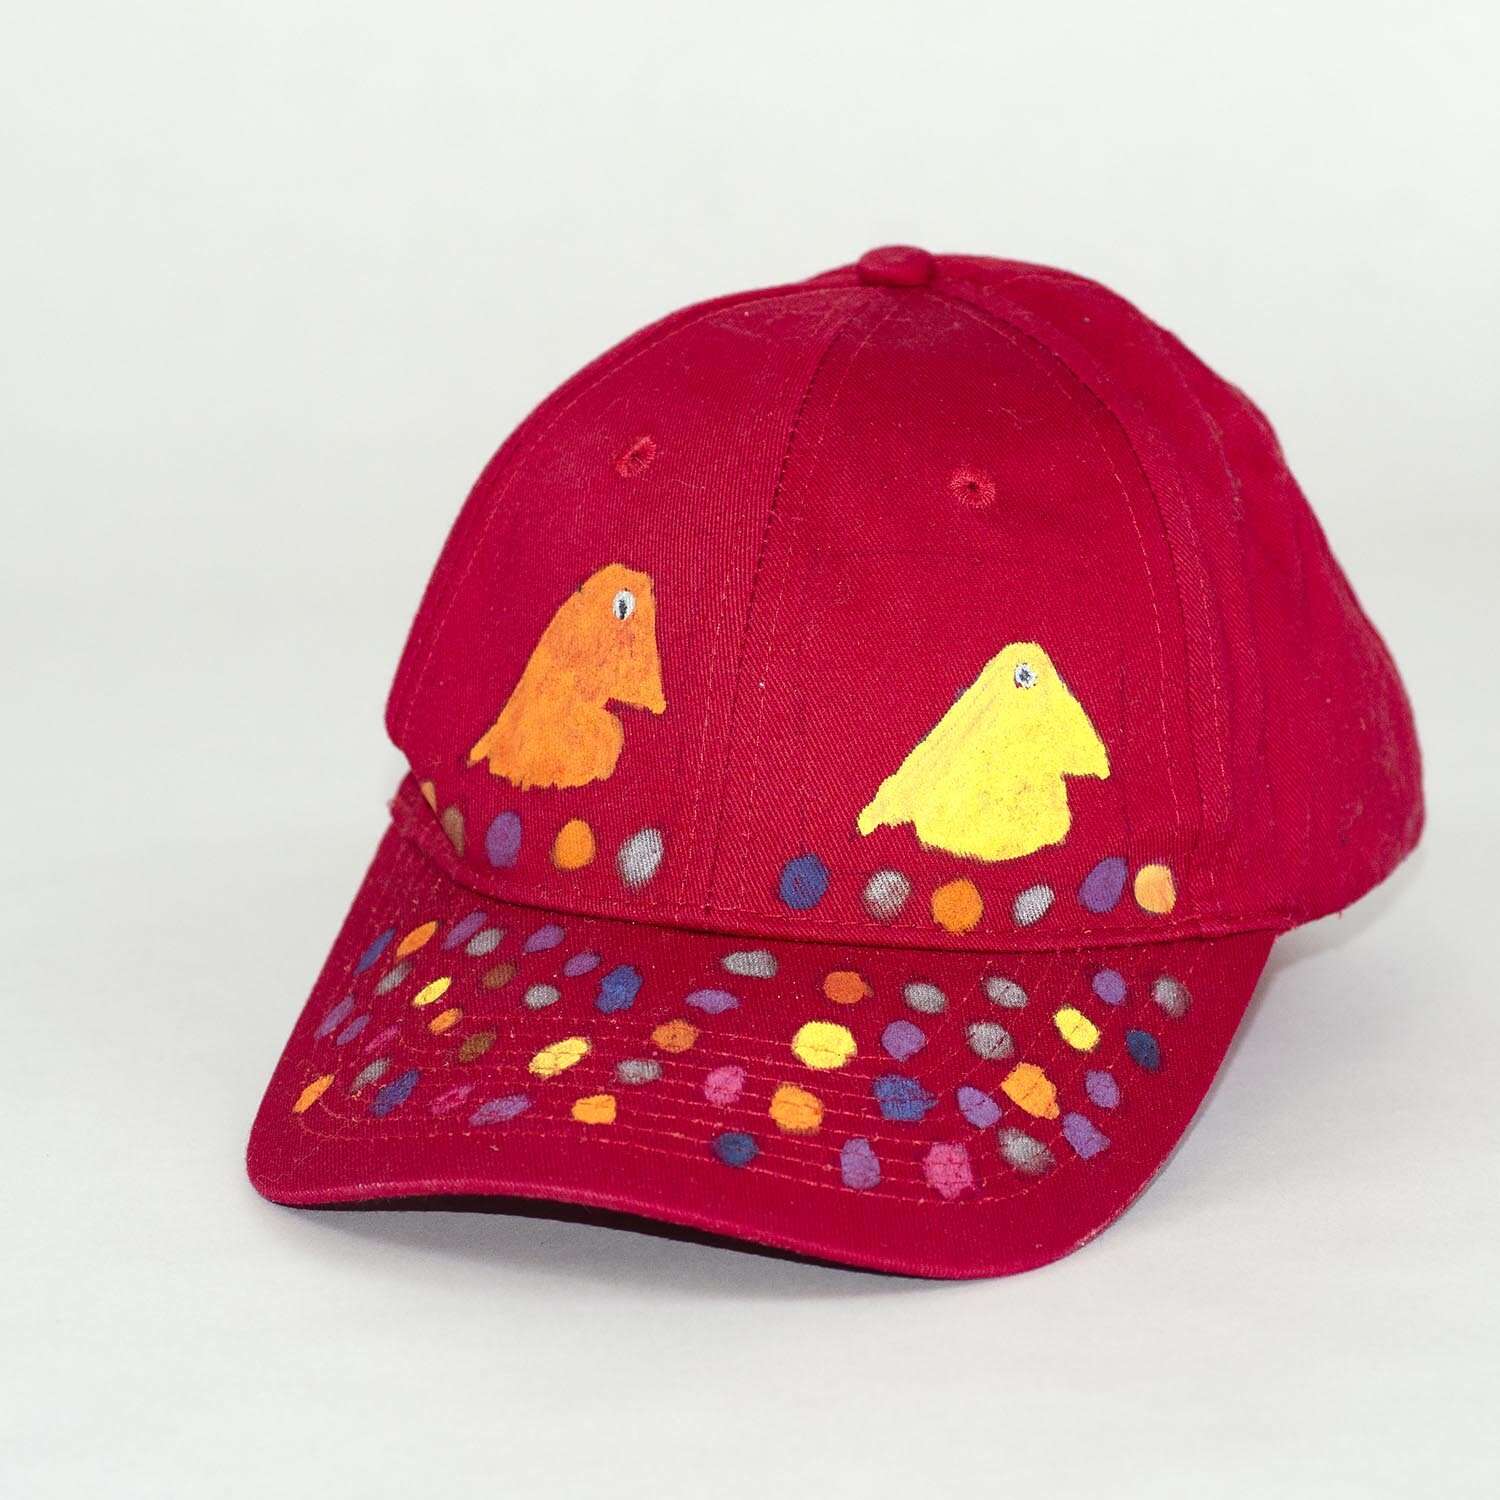 Red Baseball Cap with hand painted Puffins and Eggs by Mike Hinchcliff